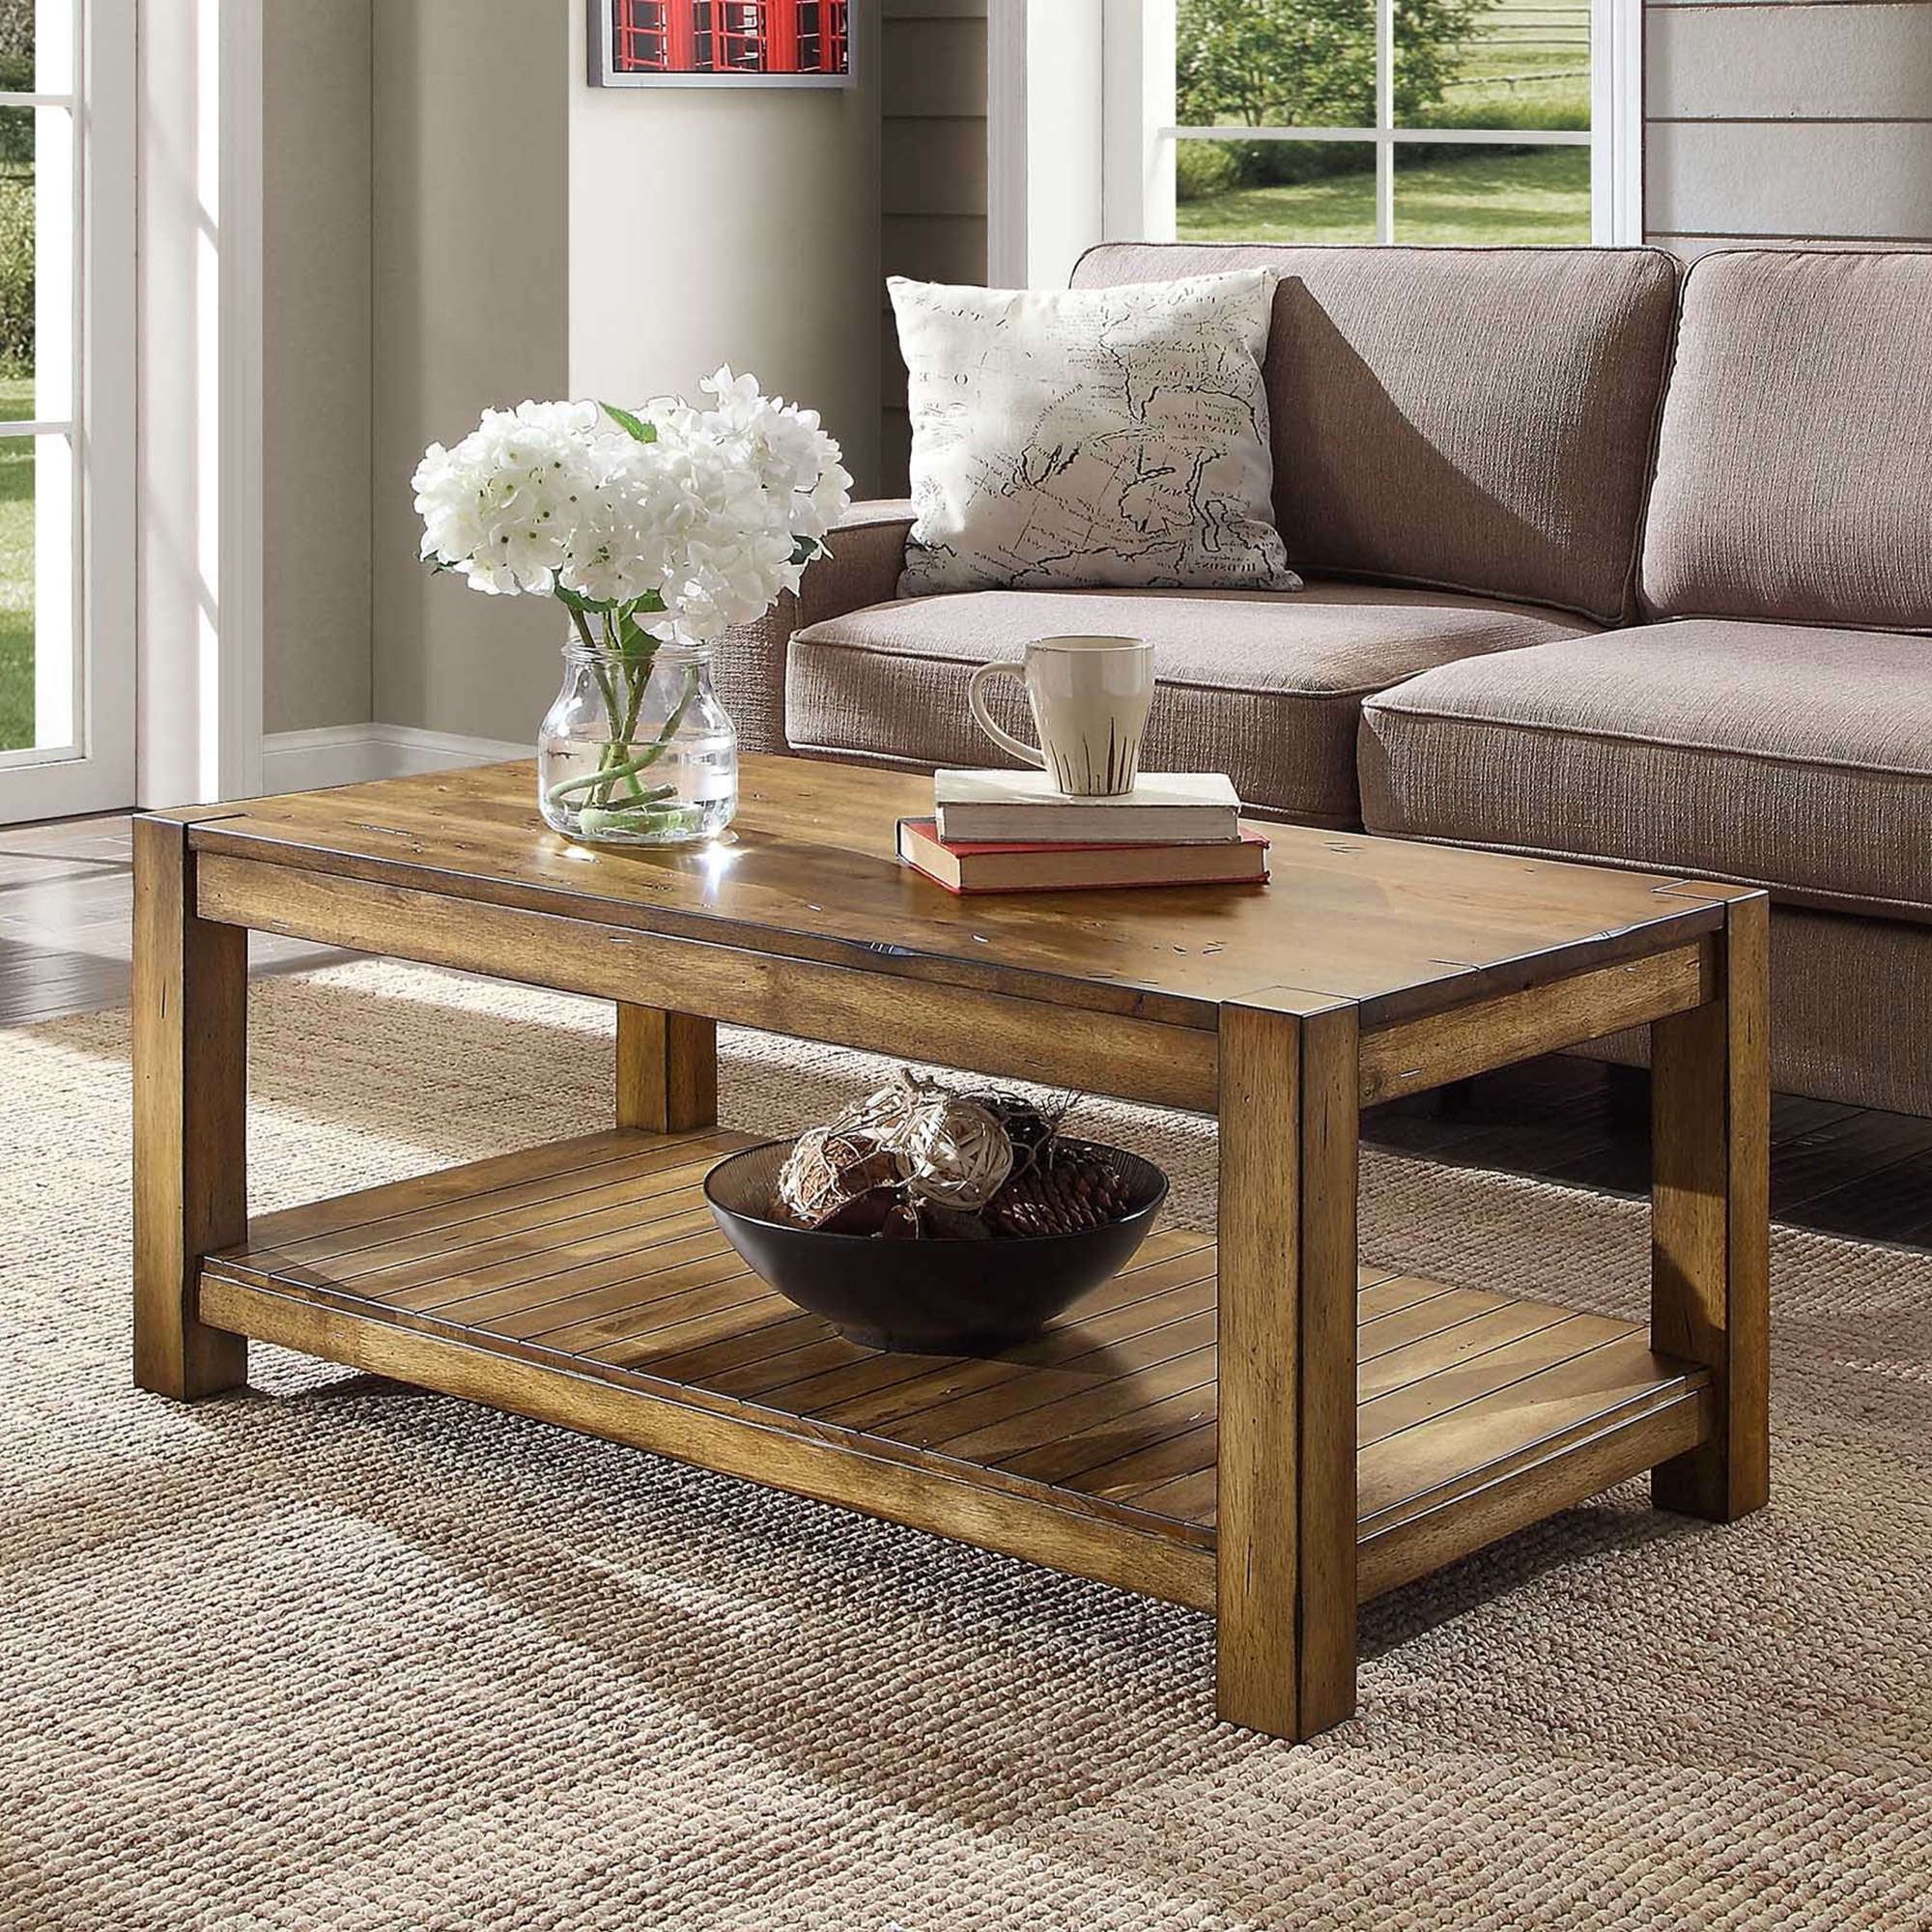 Bryant Solid Wood Coffee Table, Rustic Maple Brown Finish – Walmart Inside Recent Pemberly Row Replicated Wood Coffee Tables (View 9 of 15)